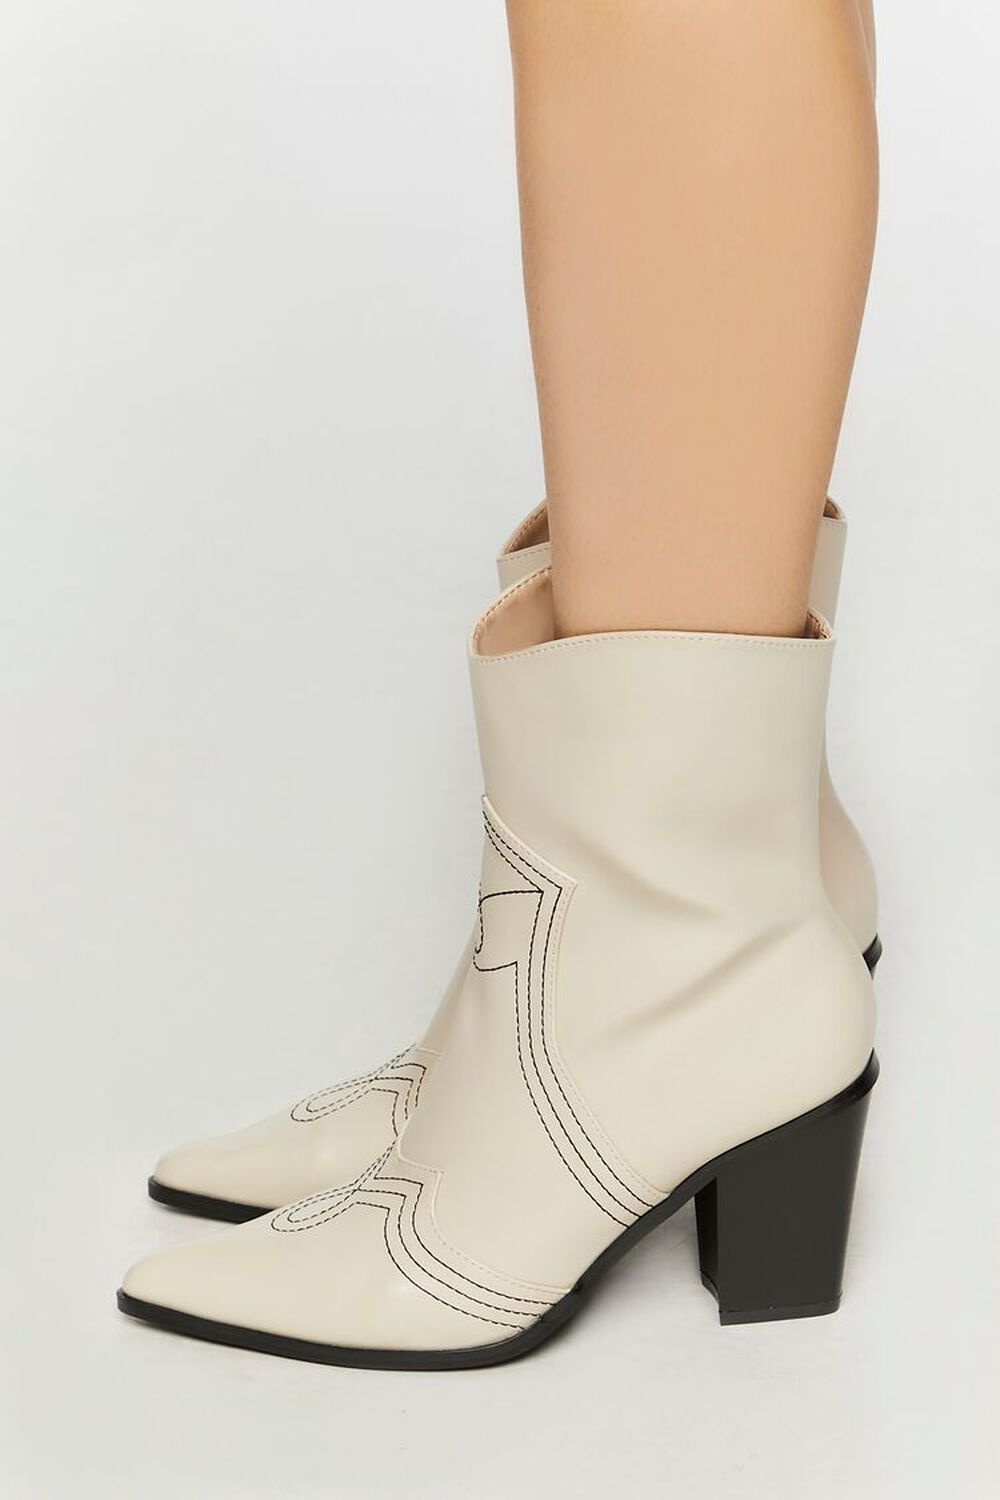 WHITE Faux Leather Contrast Cowboy Boots, image 2